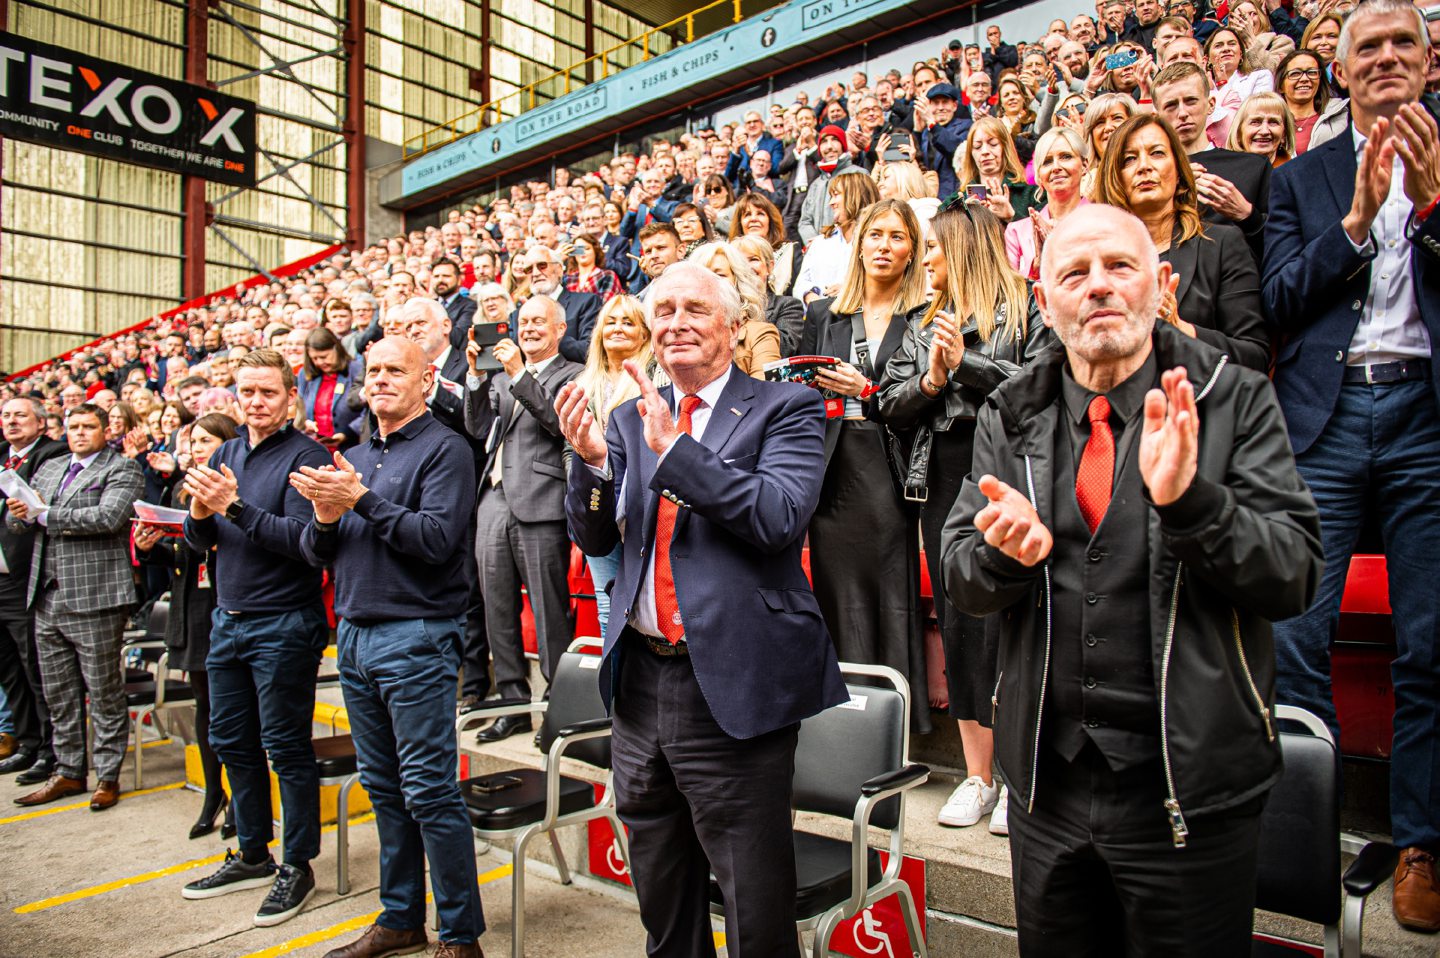 Aberdeen FC's Gothenburg Greats Freedom of the City celebratory event in May.